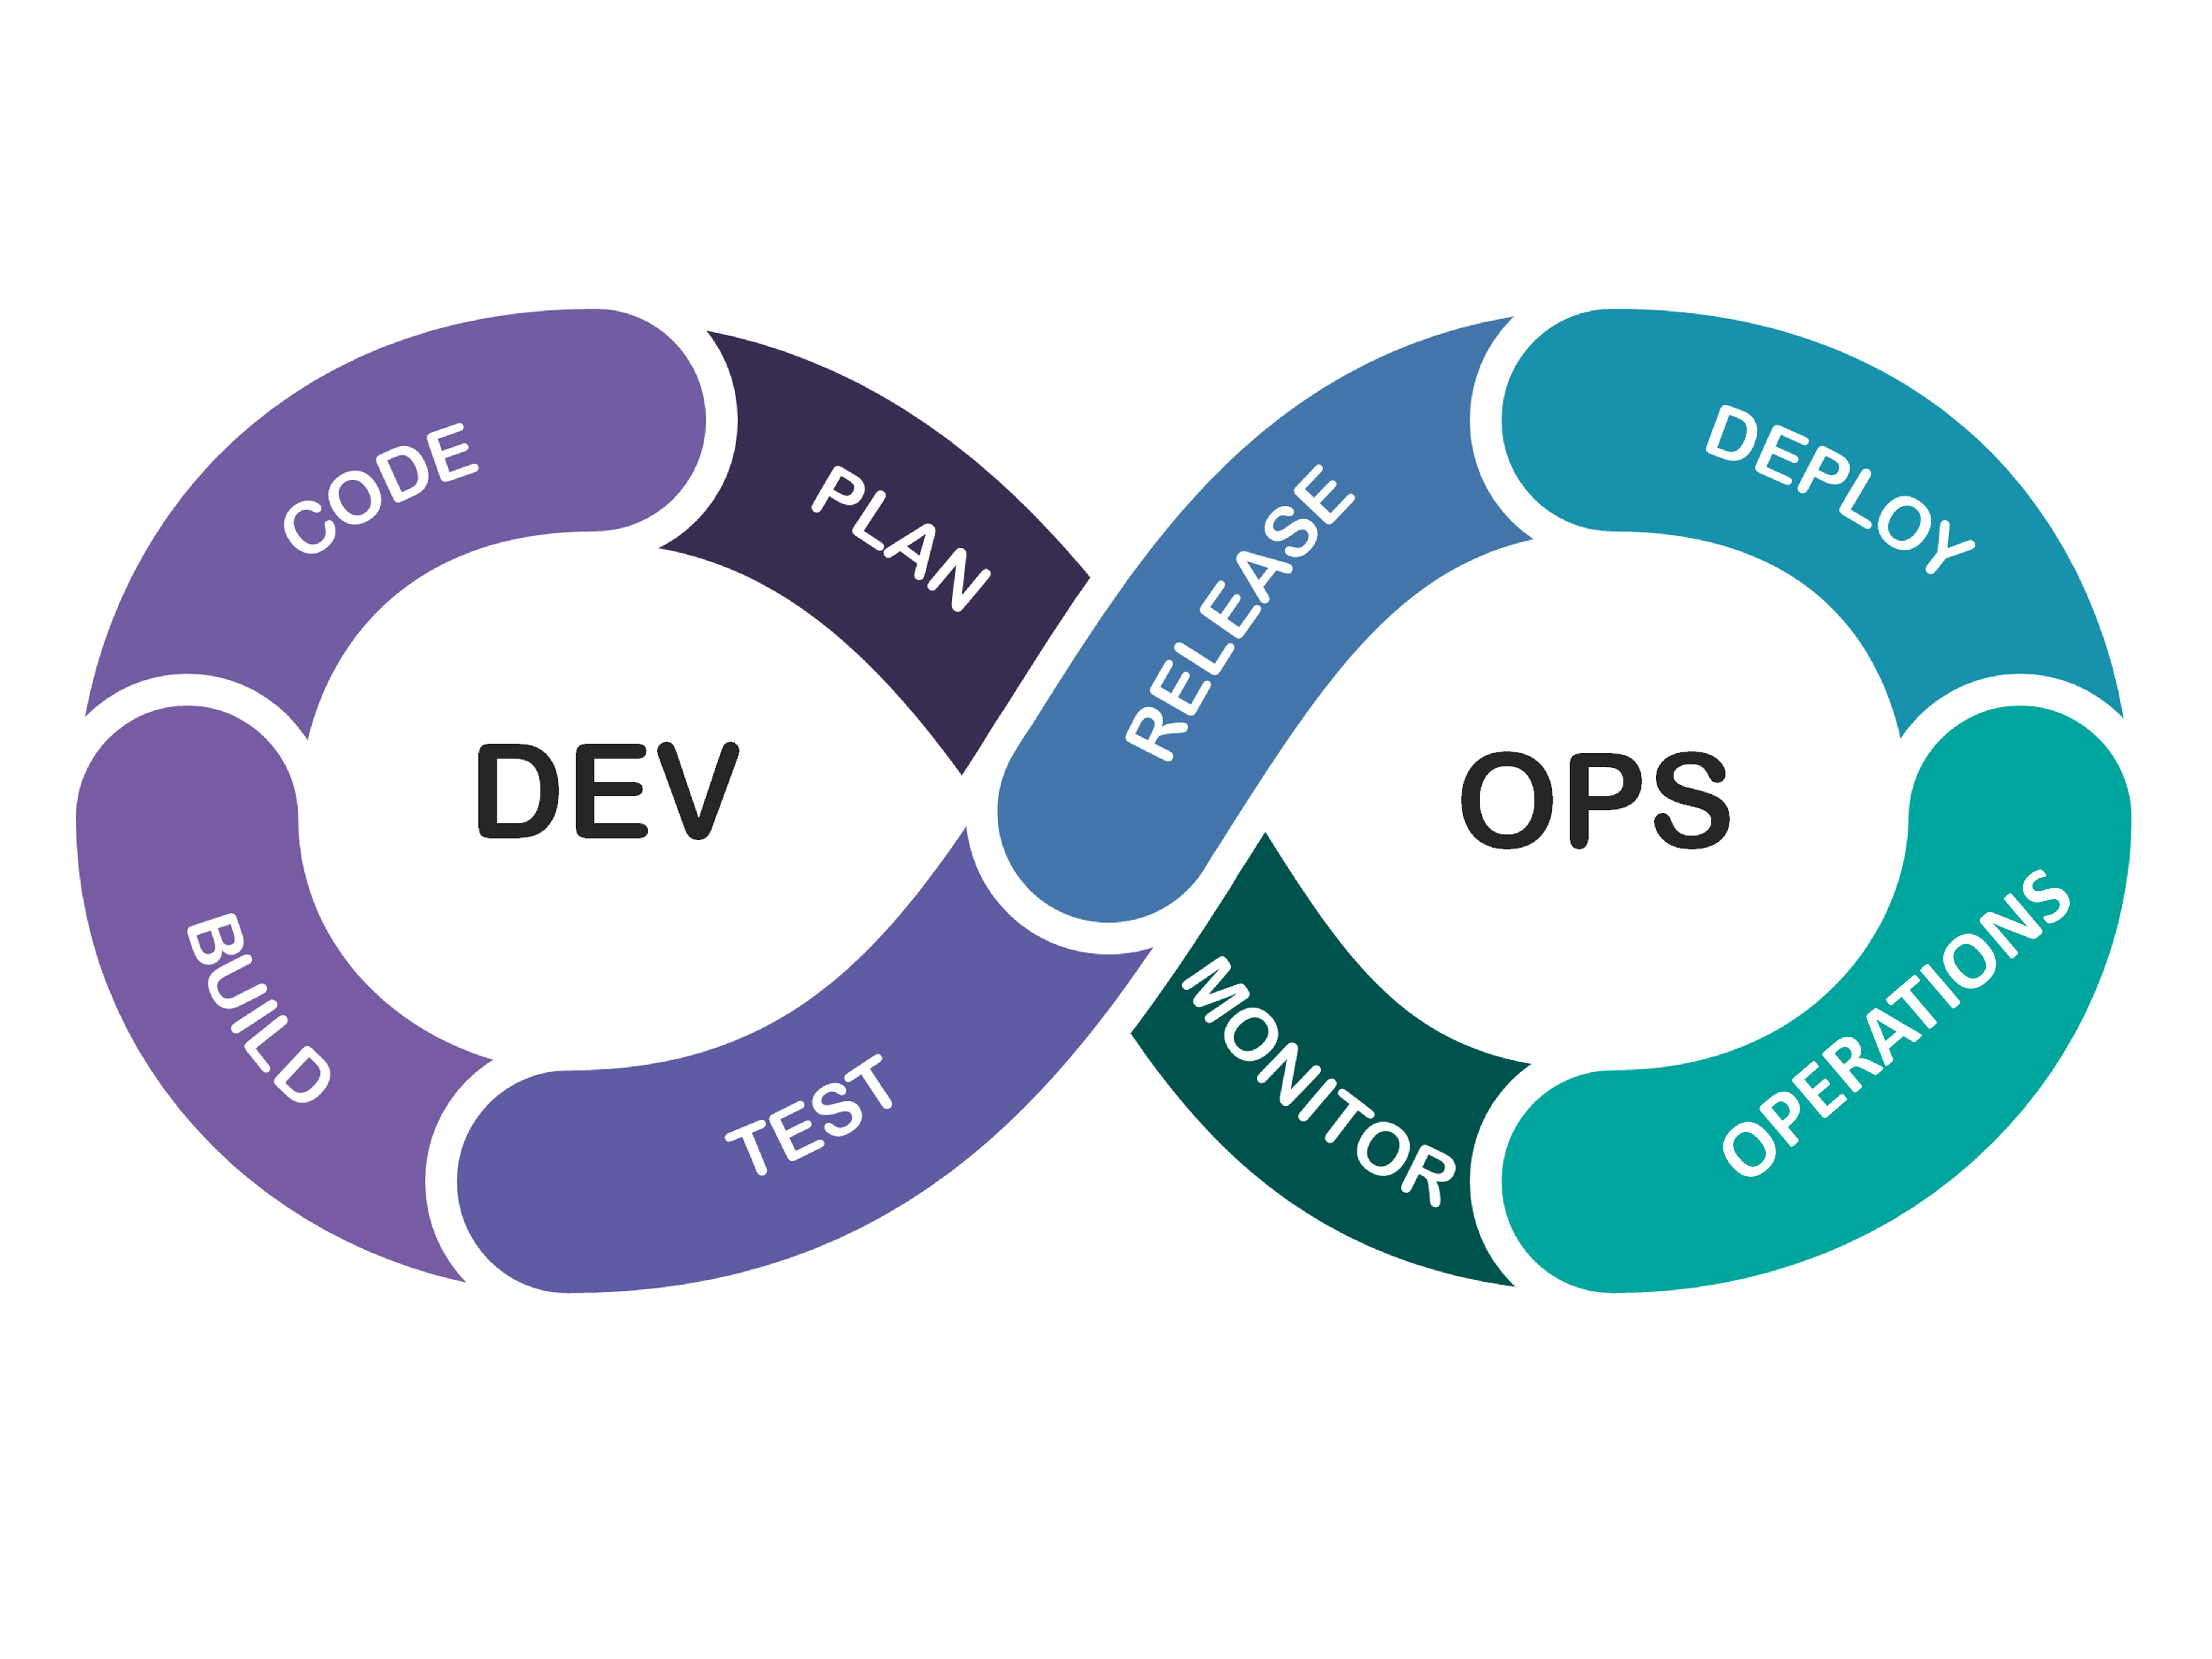 What DevOps Means to Us